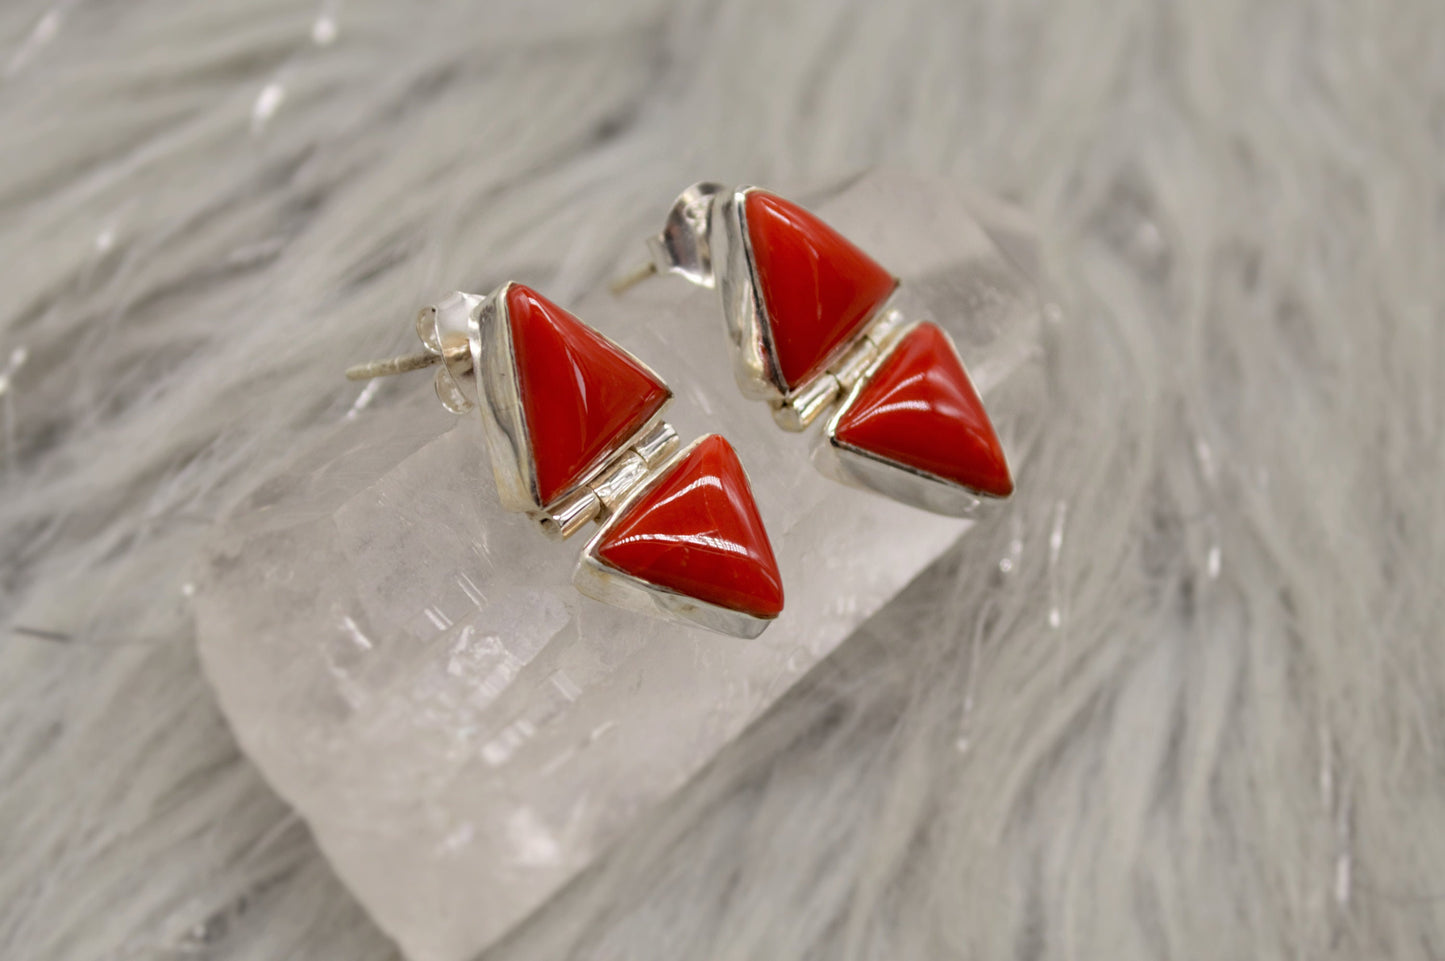 Red Coral Sterling Silver Earrings, Dainty Triangle Earrings, Minimalist Gemstone Earrings, Coral Jewelry, Christmas Gifts for Her